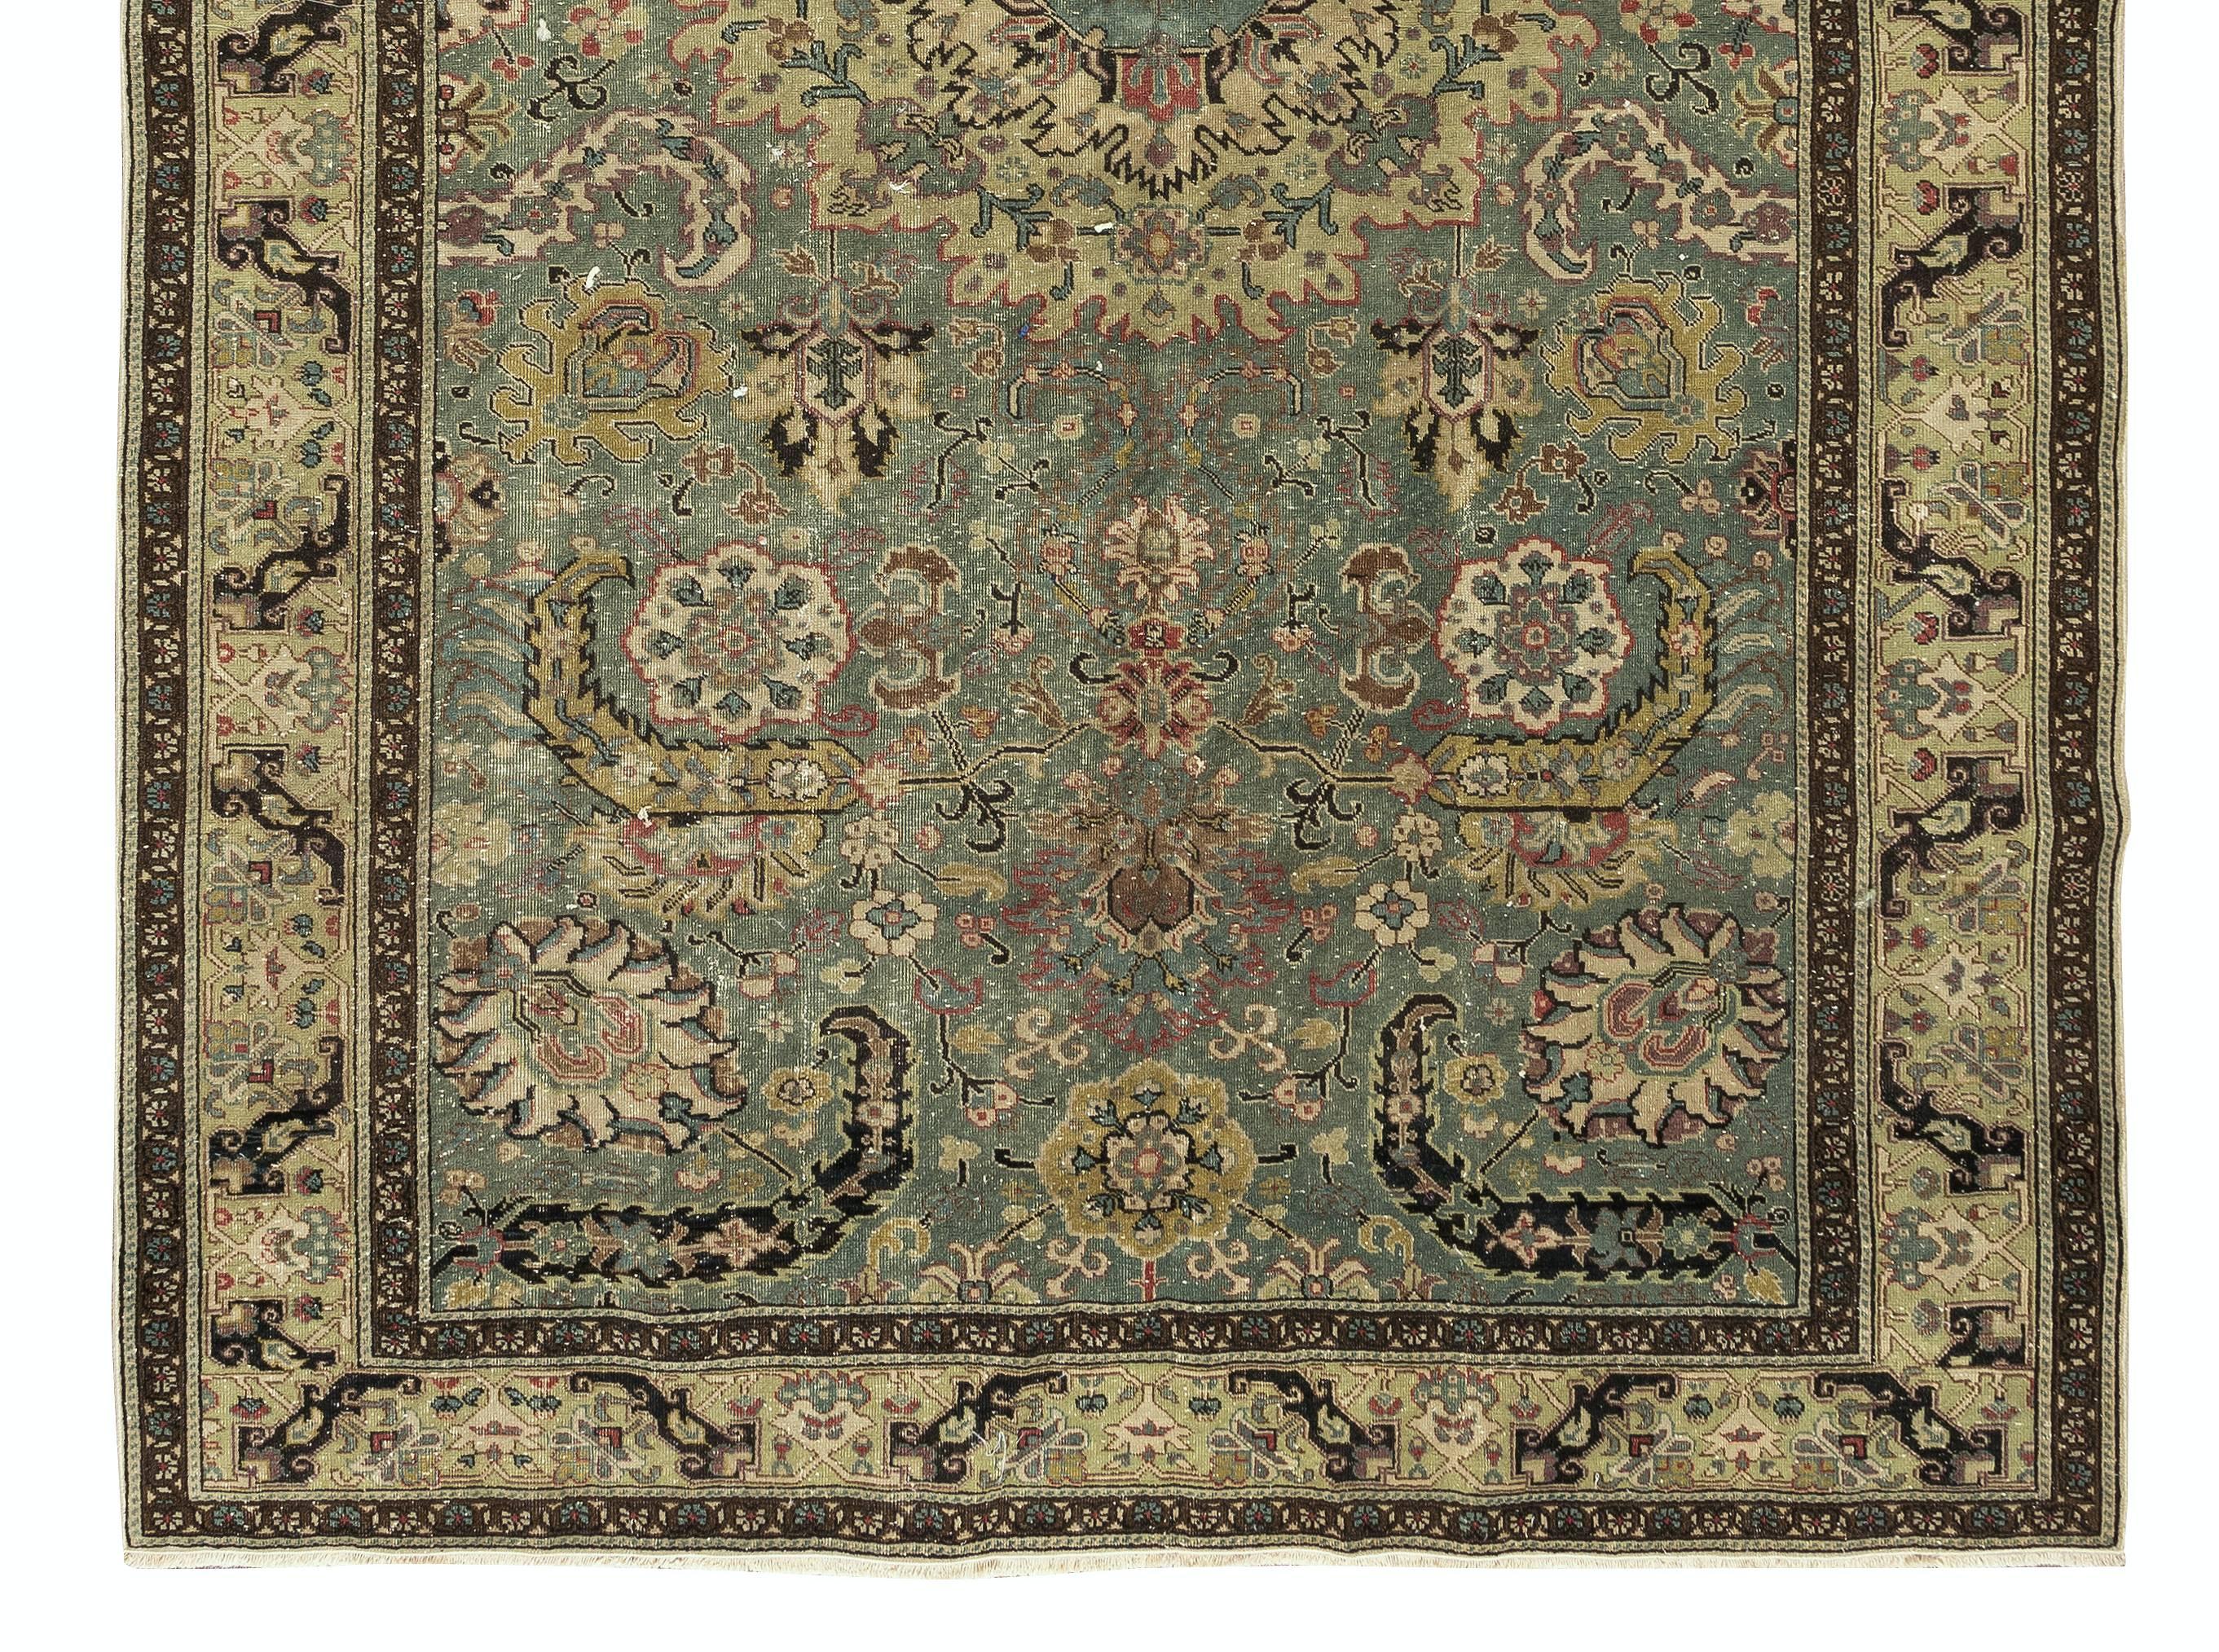 6.3x10 Ft Modern Handmade Turkish Kayseri Wool Area Rug in Shades of Green In Excellent Condition For Sale In Philadelphia, PA